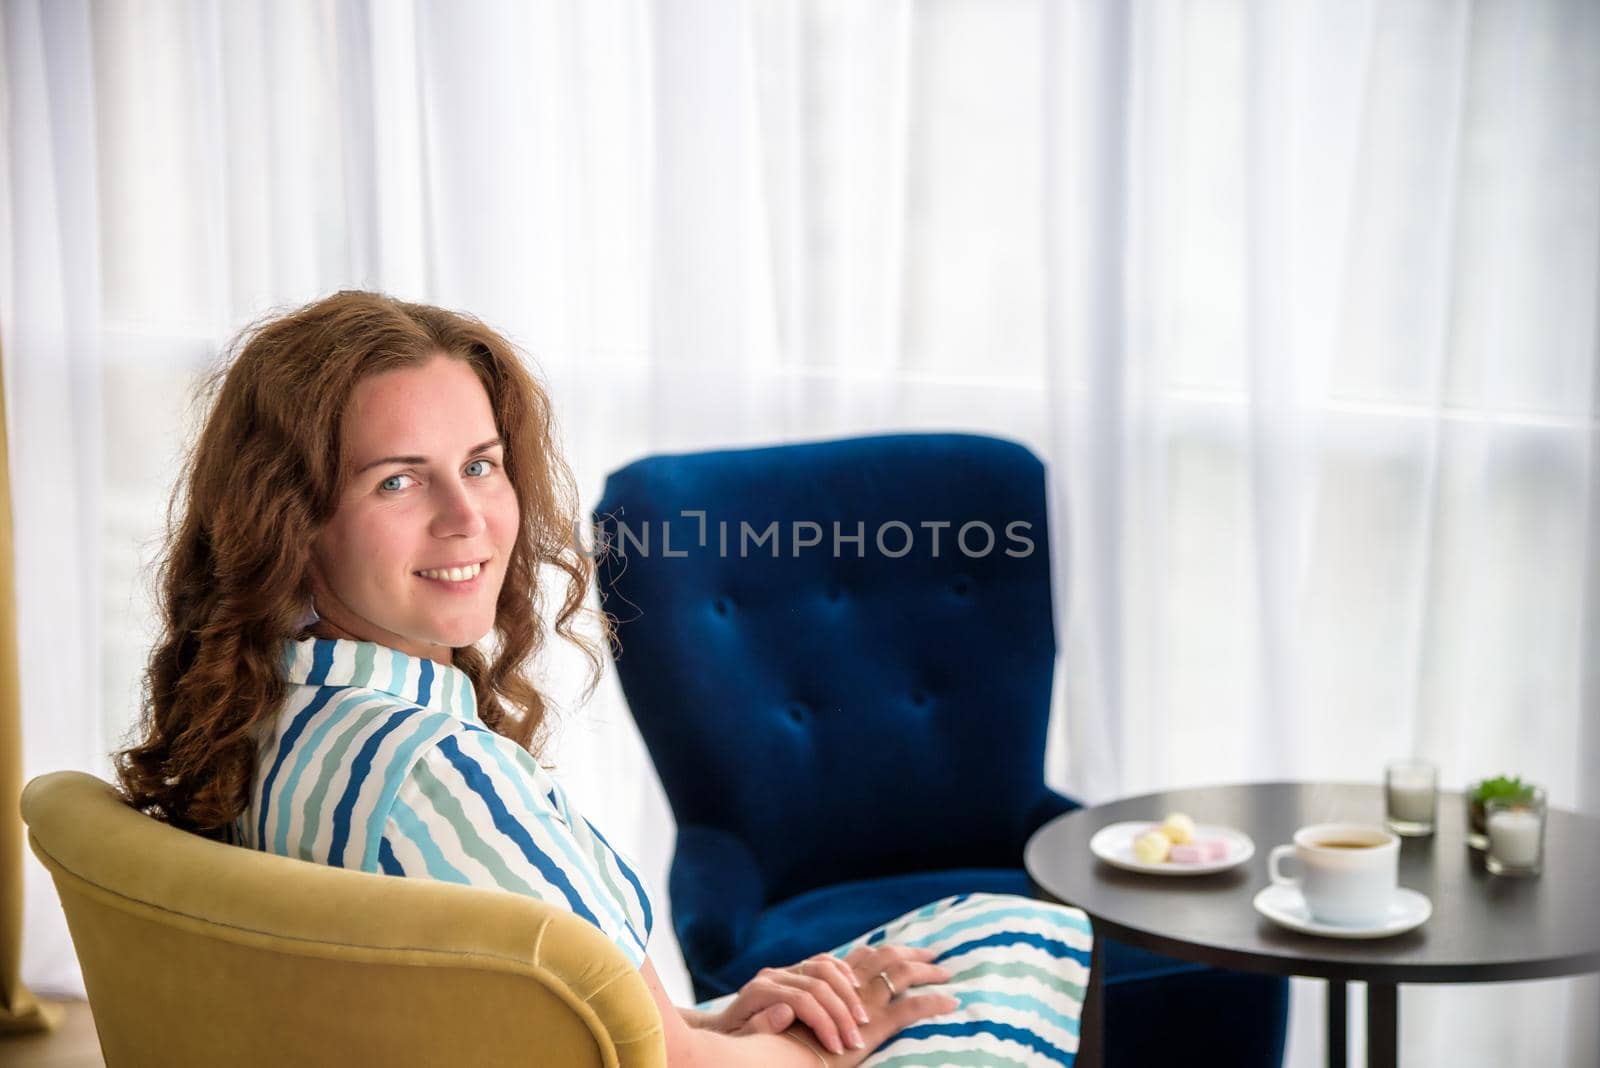 Young woman at home sitting on modern chair in front of window relaxing in her living room and drinking coffee or tea with sweets or desert. Relax before new business day.